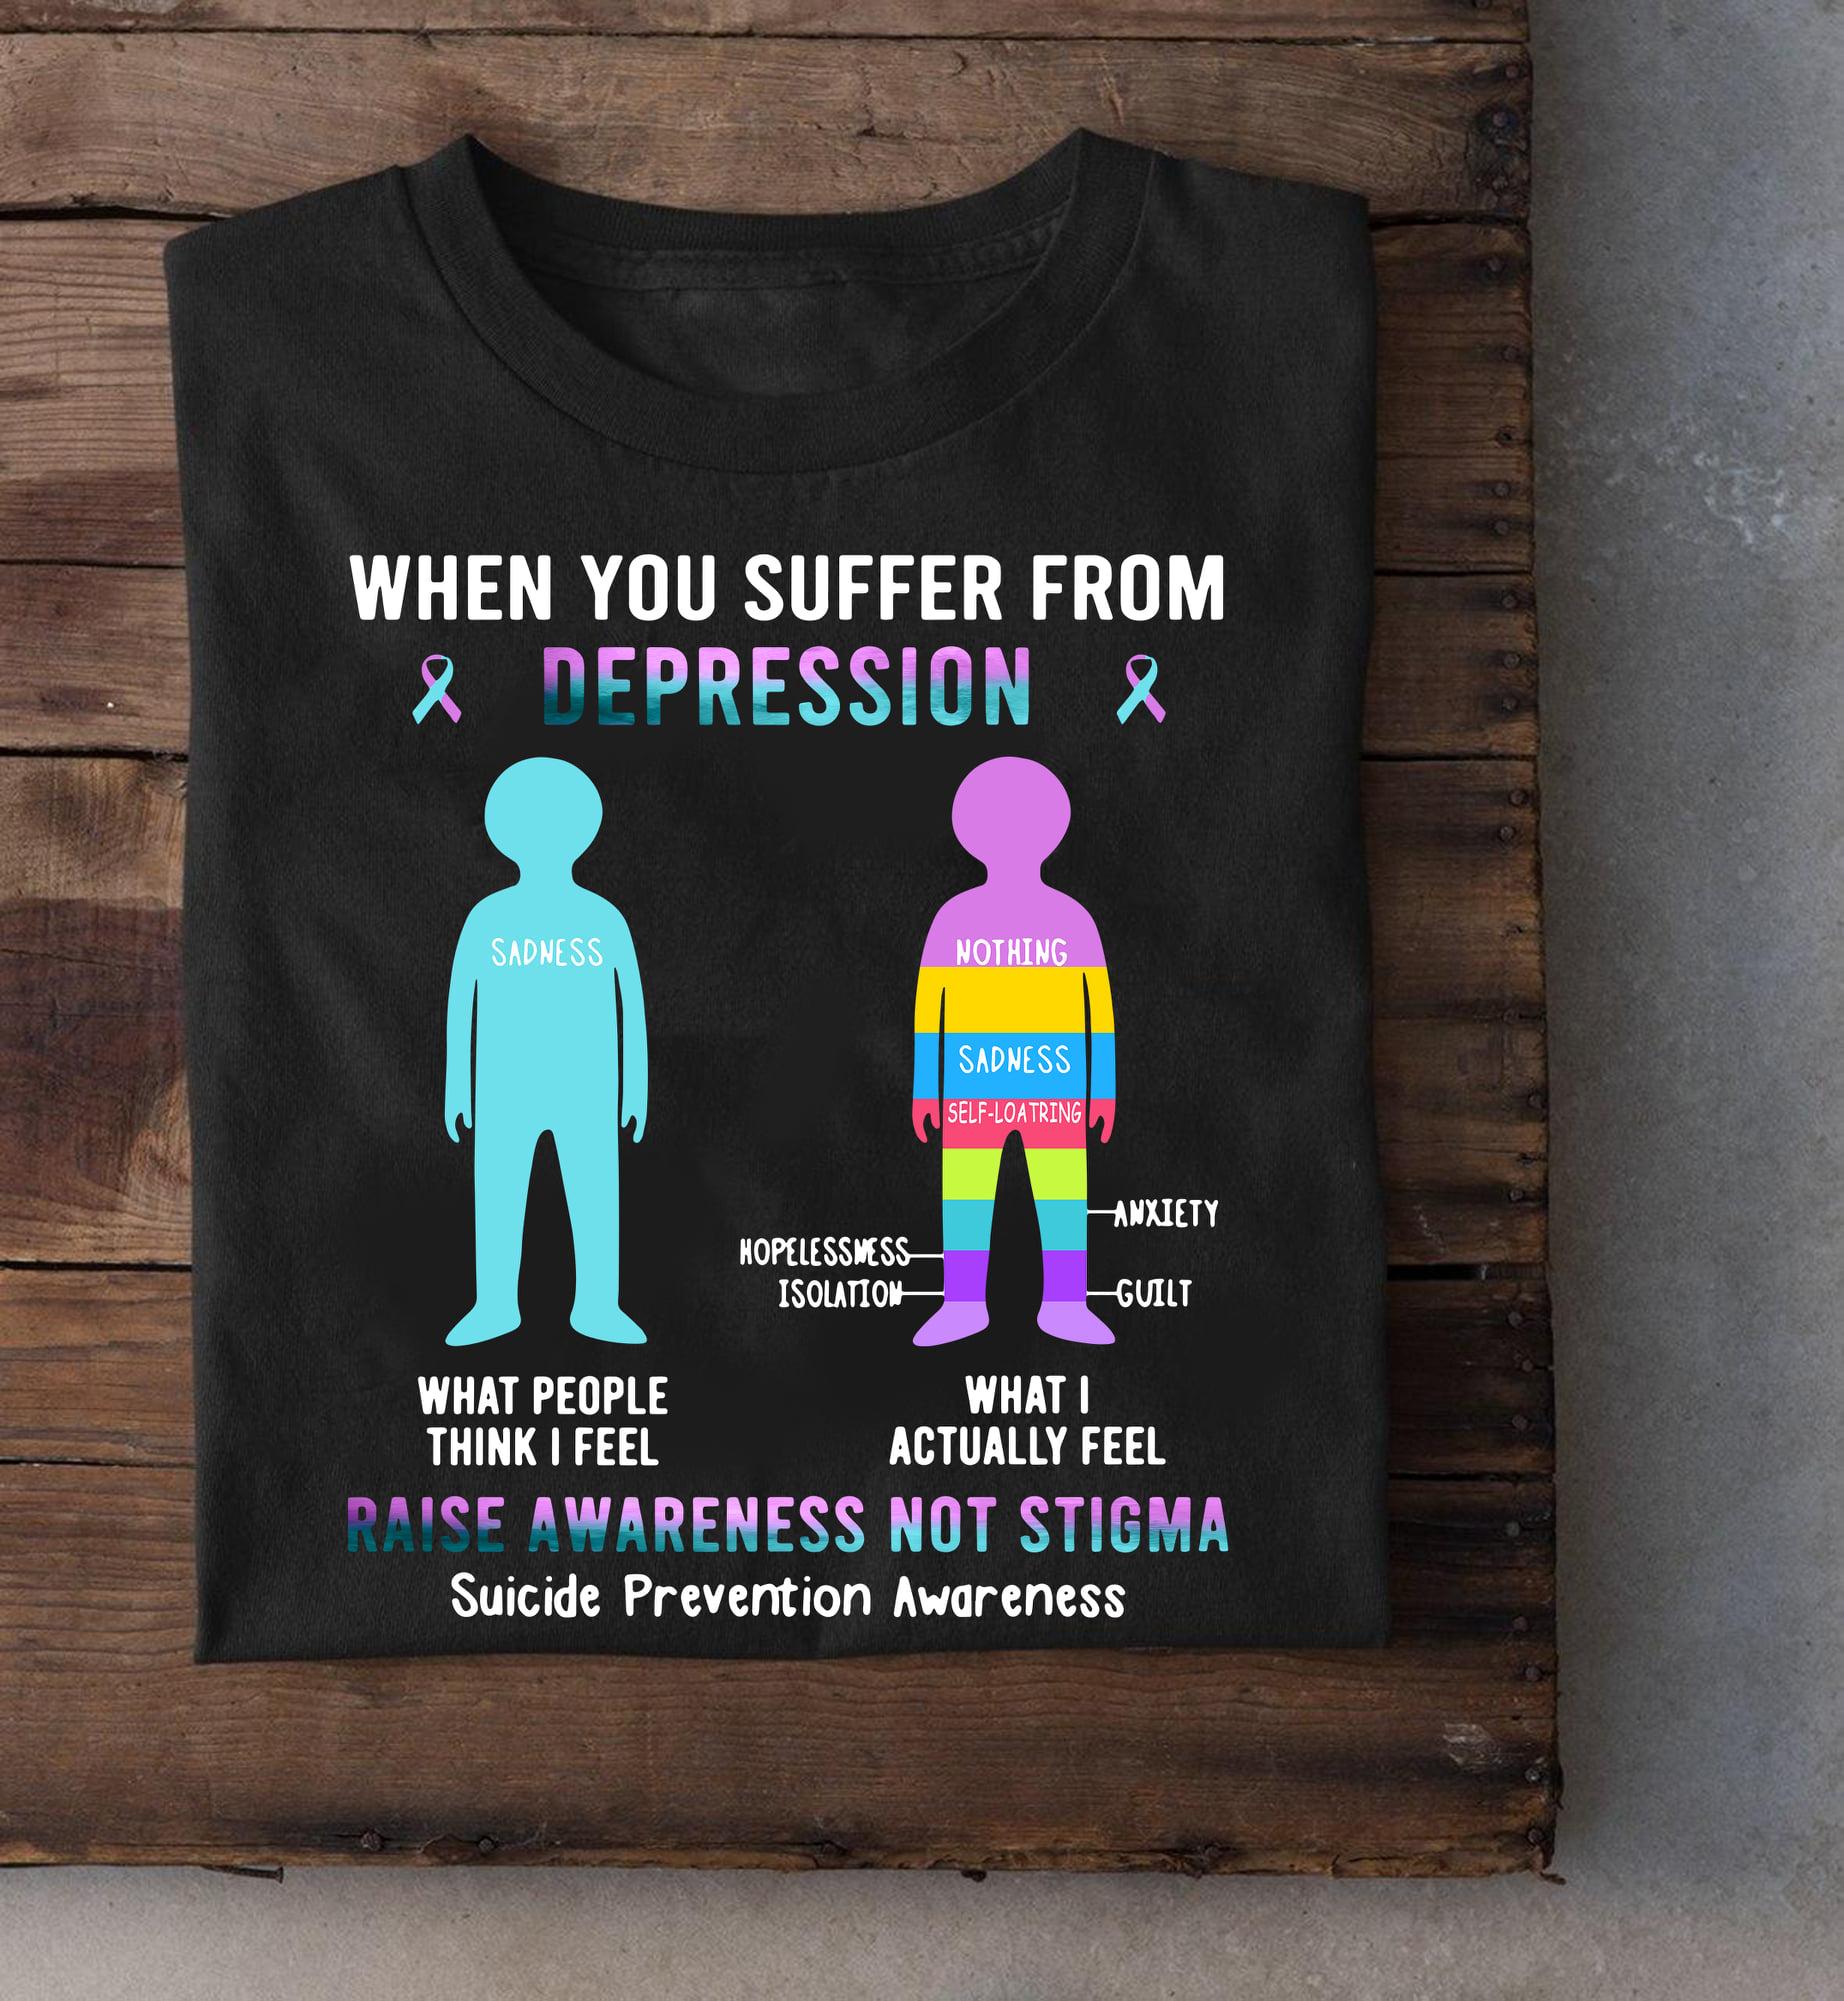 When you suffer from depression, raise awareness not stigma - Suicide prevention awareness